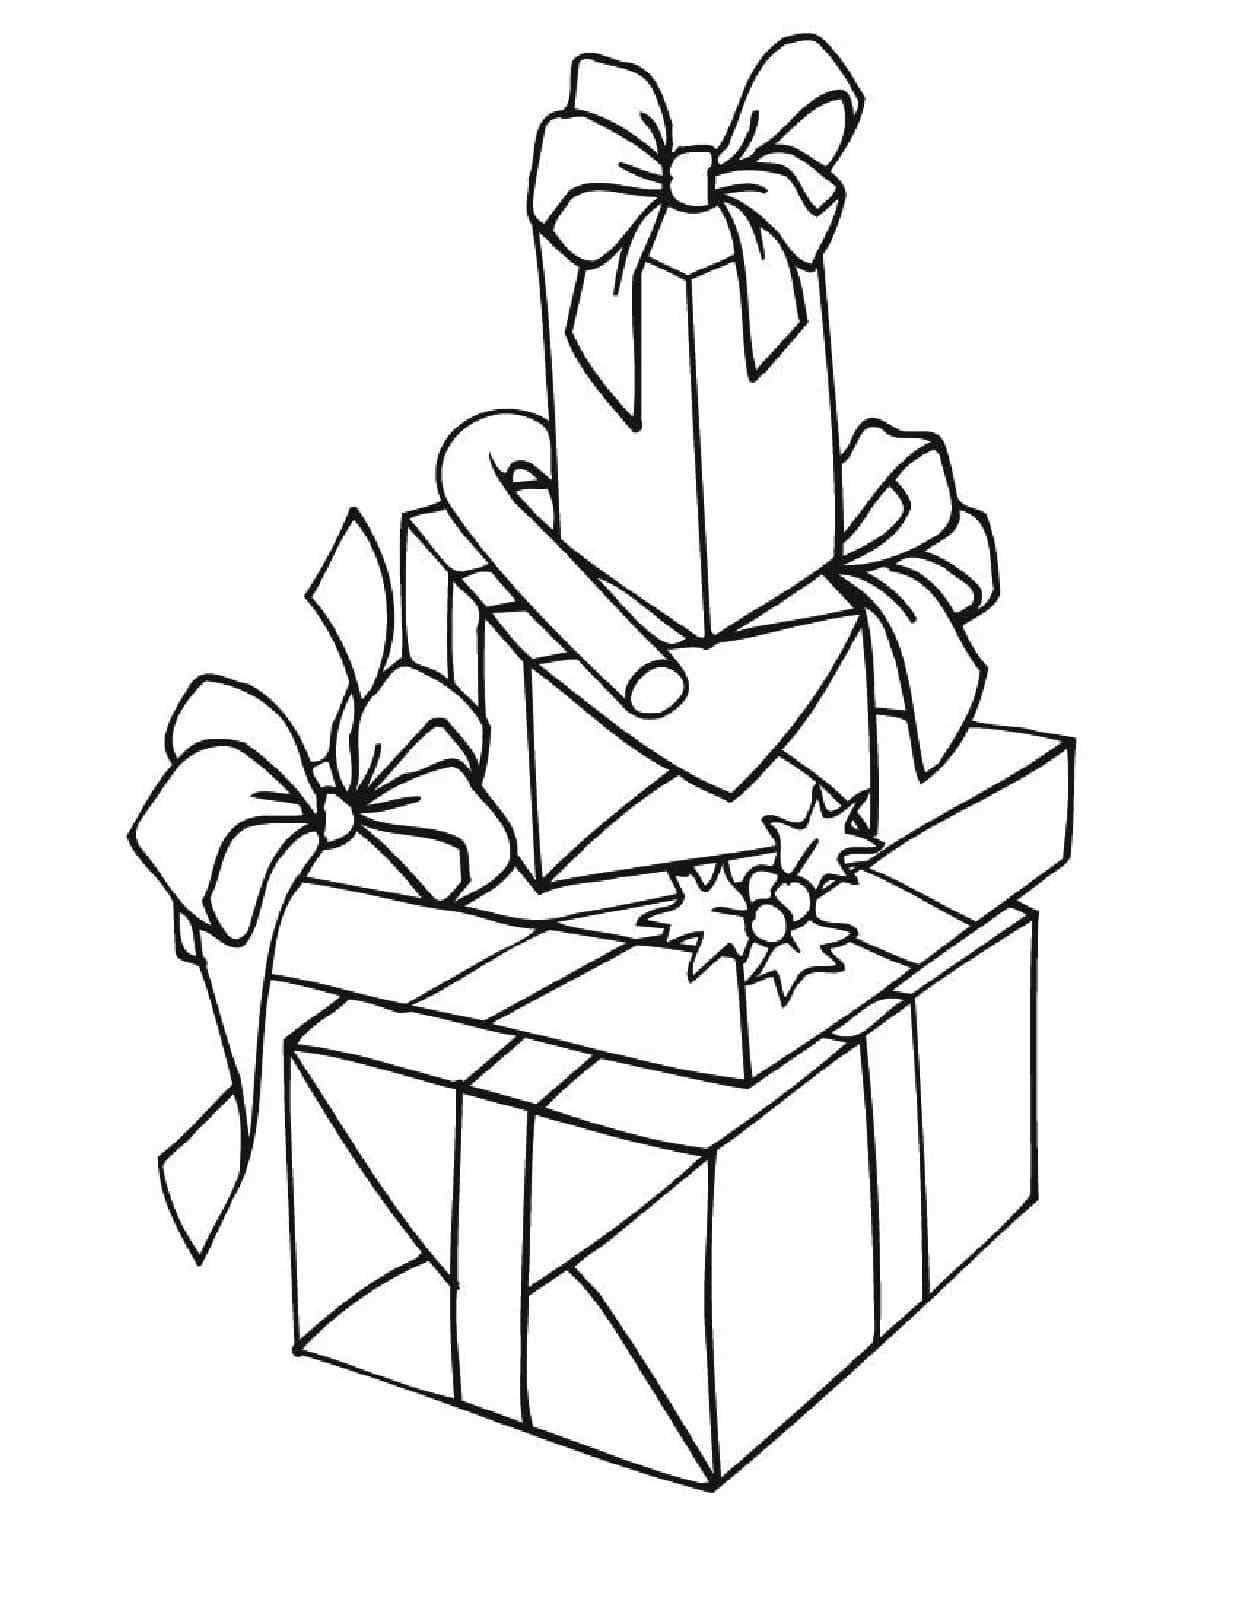 Tall Pyramid Of Gifts Coloring Page